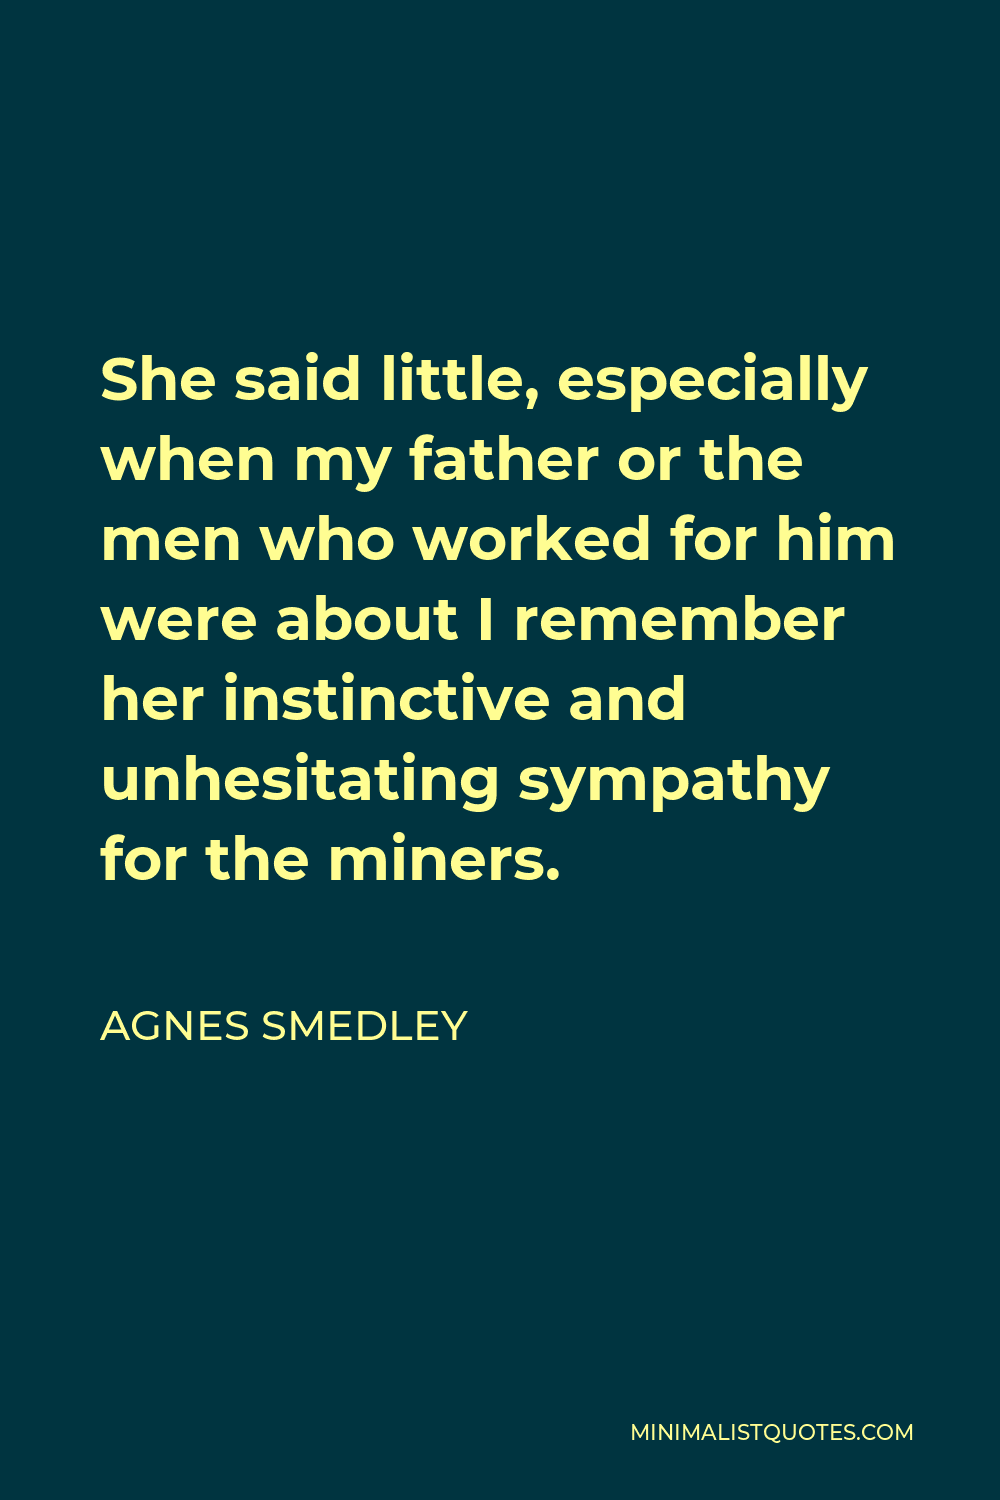 Agnes Smedley Quote - She said little, especially when my father or the men who worked for him were about I remember her instinctive and unhesitating sympathy for the miners.